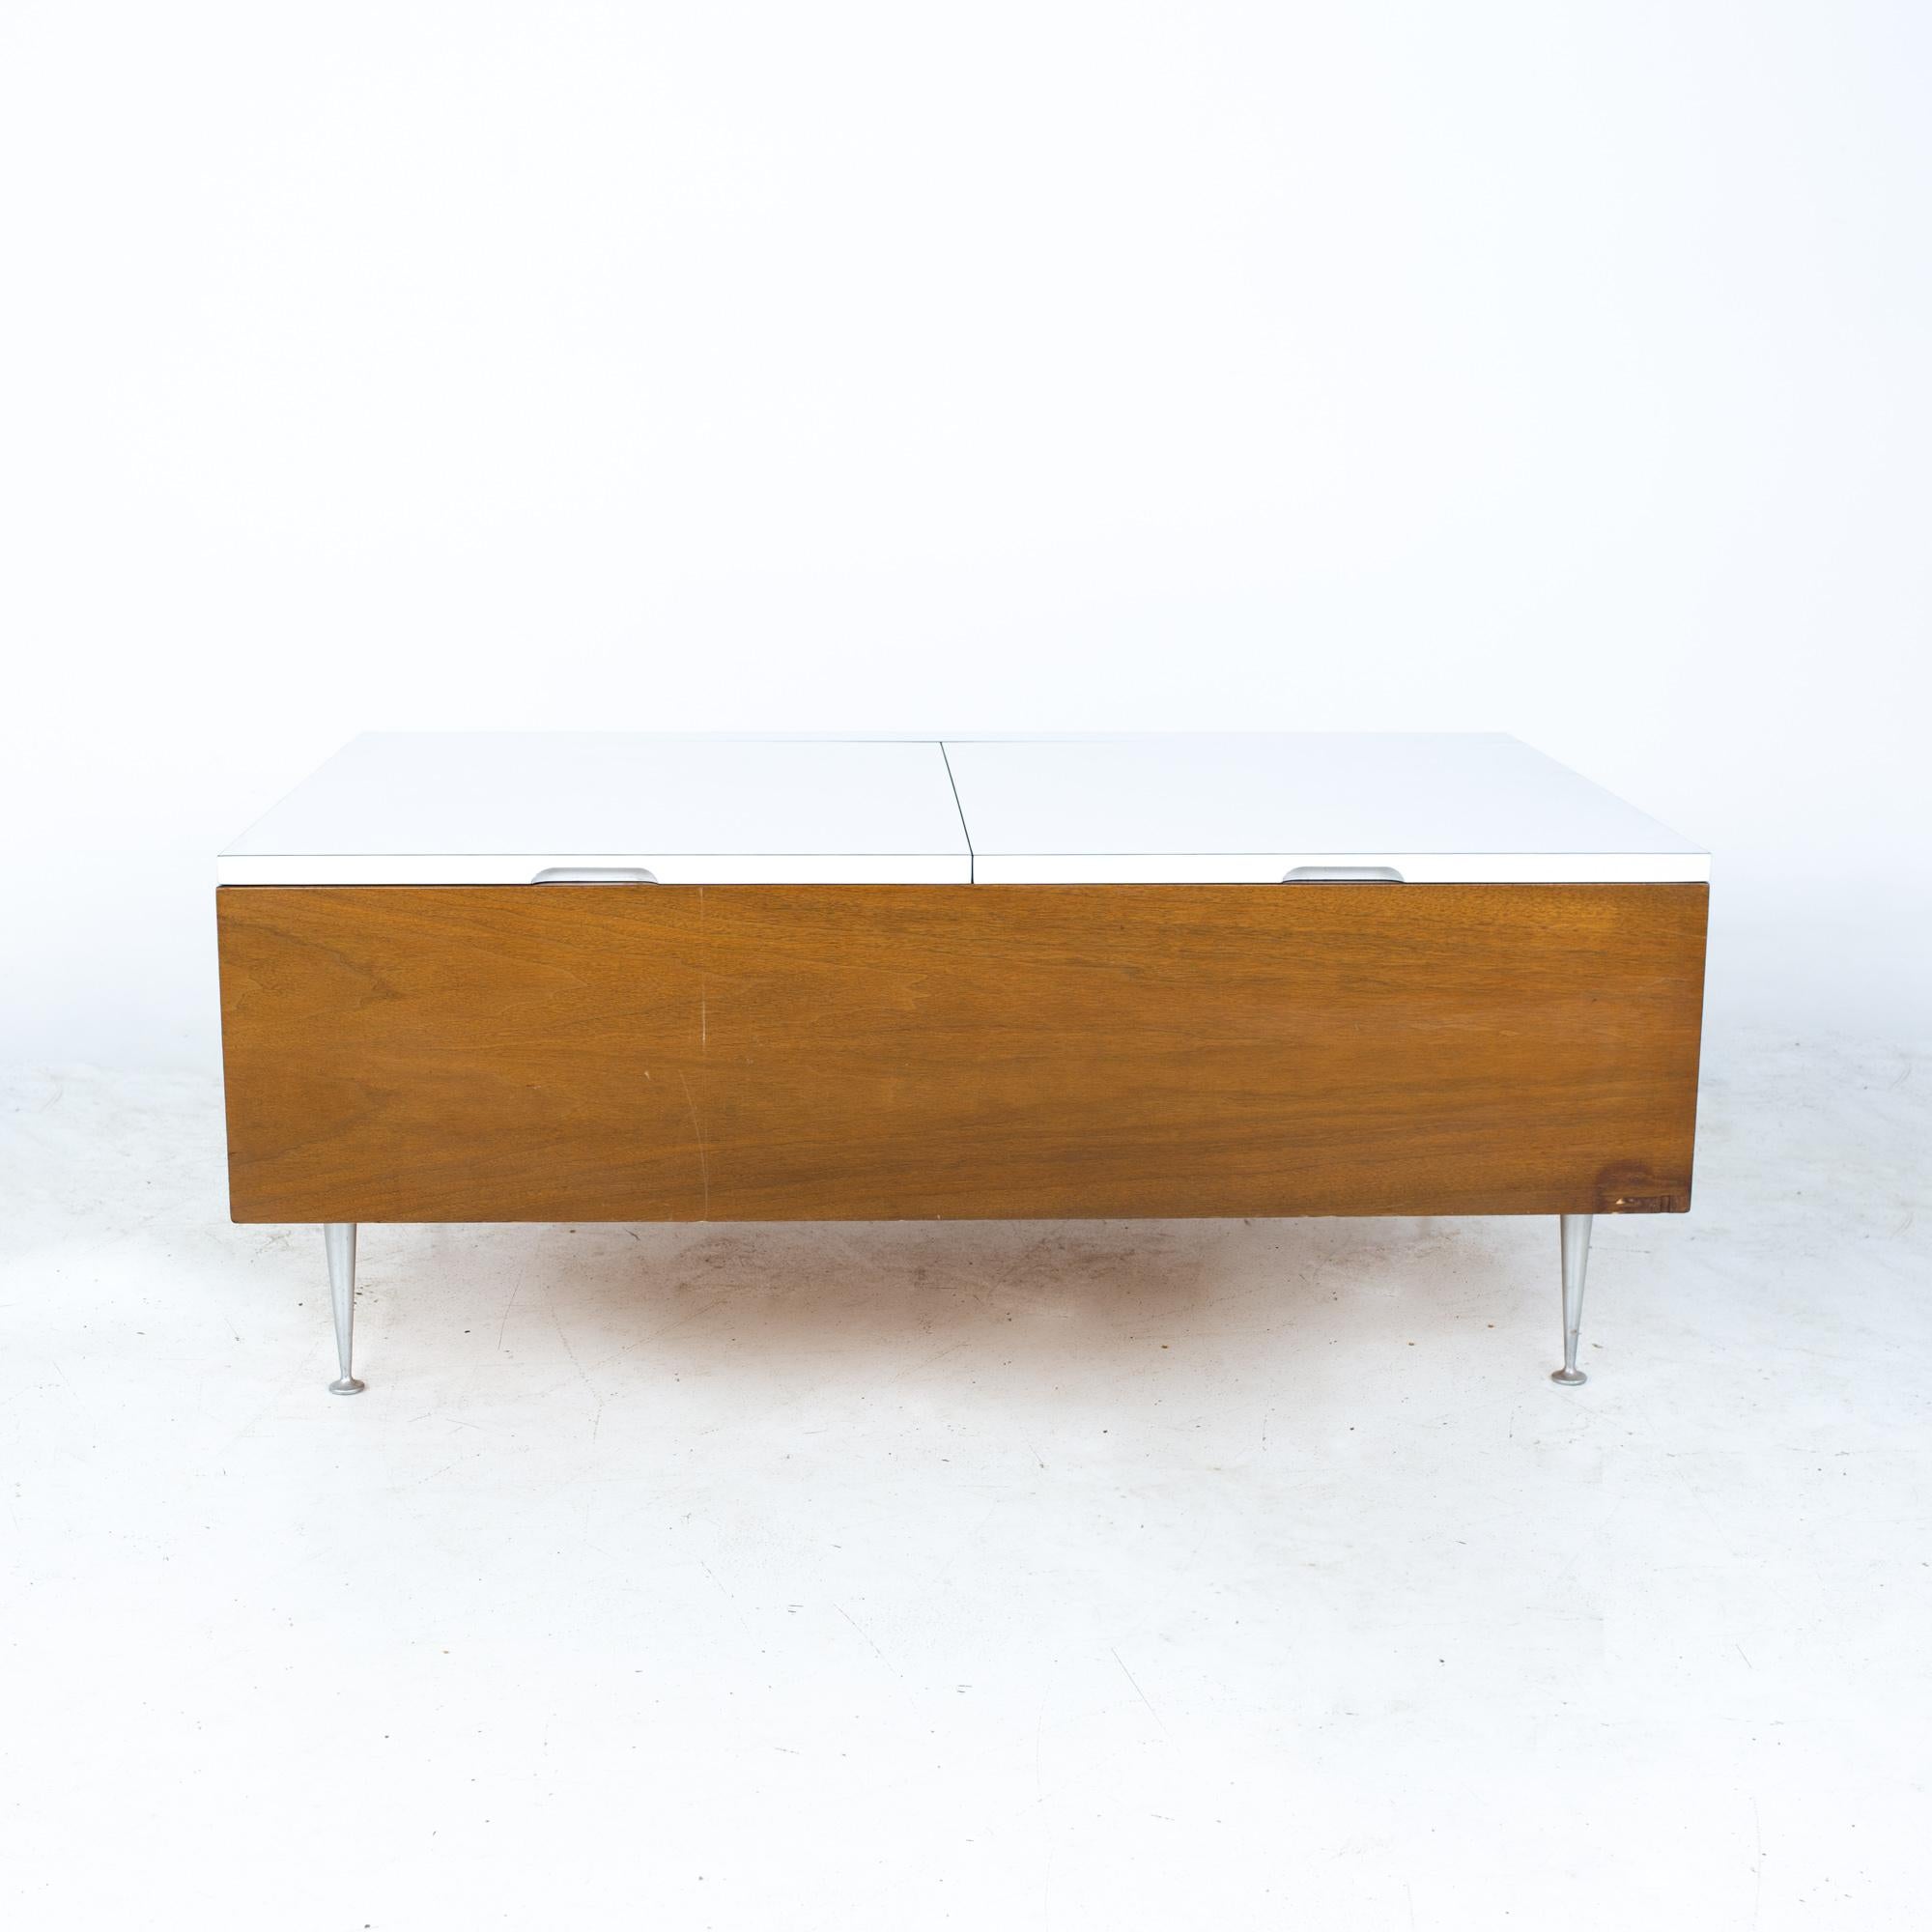 George Nelson for Herman Miller mid century storage coffee table
Coffee table measures: 48 wide x 30 deep x 19 inches high

All pieces of furniture can be had in what we call restored vintage condition. That means the piece is restored upon